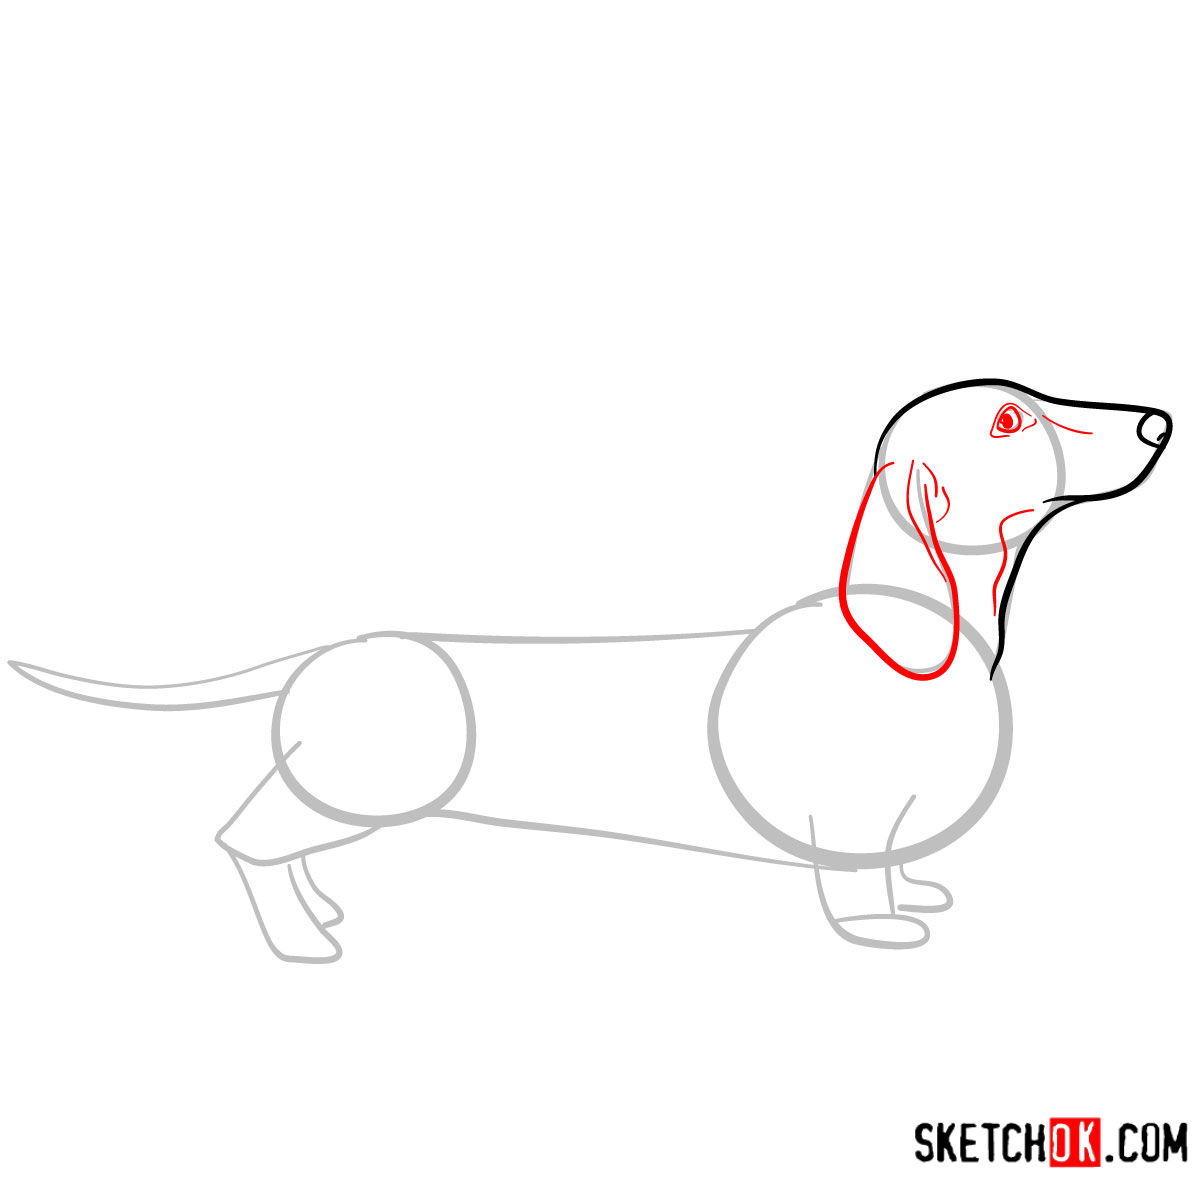 How to draw the Dachshund dog - step 04